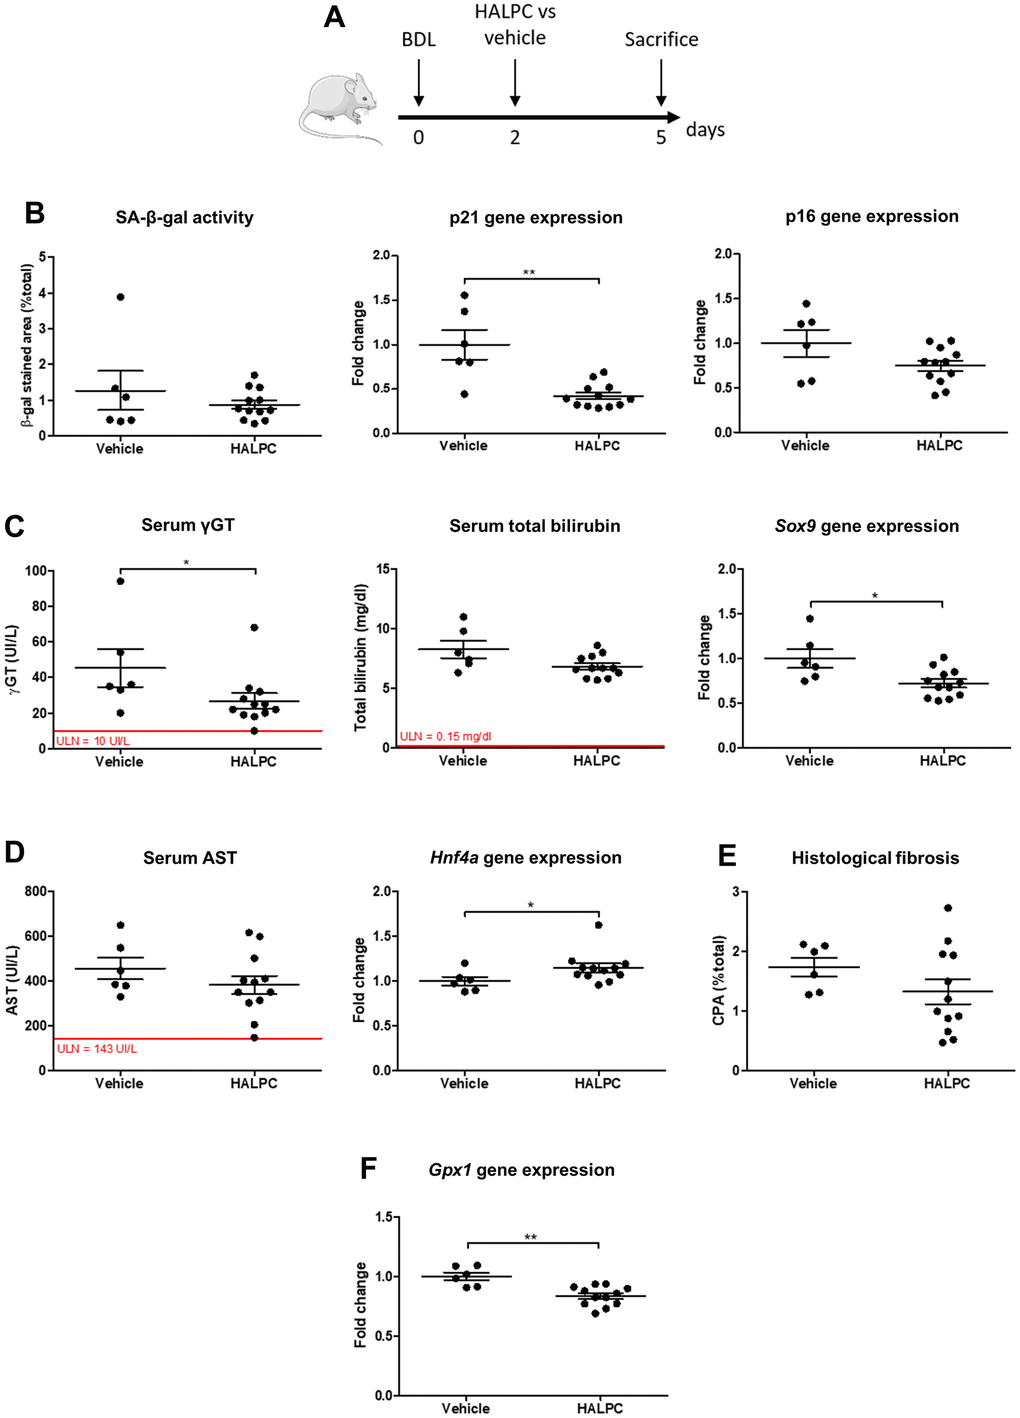 HALPC administration in BDL rats. (A) Operated rats received HALPC (n=12) through peripheral vein injection 48 hours after BDL and were compared to vehicle-treated controls (n=6). (B) HALPC decreased the early marker of senescence p21 gene expression, but no significant effect was observed on later markers (SA-β-gal activity and p16 gene expression). (C) HALPC decreased cholangiocytes injury (serum γGT) and biliary proliferation (Sox9), but had no significant effect on biochemical cholestasis (serum total bilirubin). (D, E) HALPC slightly reduced the hepatocytes mass loss (Hnf4a) while having no significant effect on serum AST nor on liver histological fibrosis. (F) HALPC reduced Gpx1 expression. BDL: bile duct ligation; HALPC: human allogenic liver-derived progenitor cells; SA-β-gal: senescence-associated β-galactosidase; ULN: upper limit of normal. Data is presented as mean ± SEM; *p≤0.05; **p